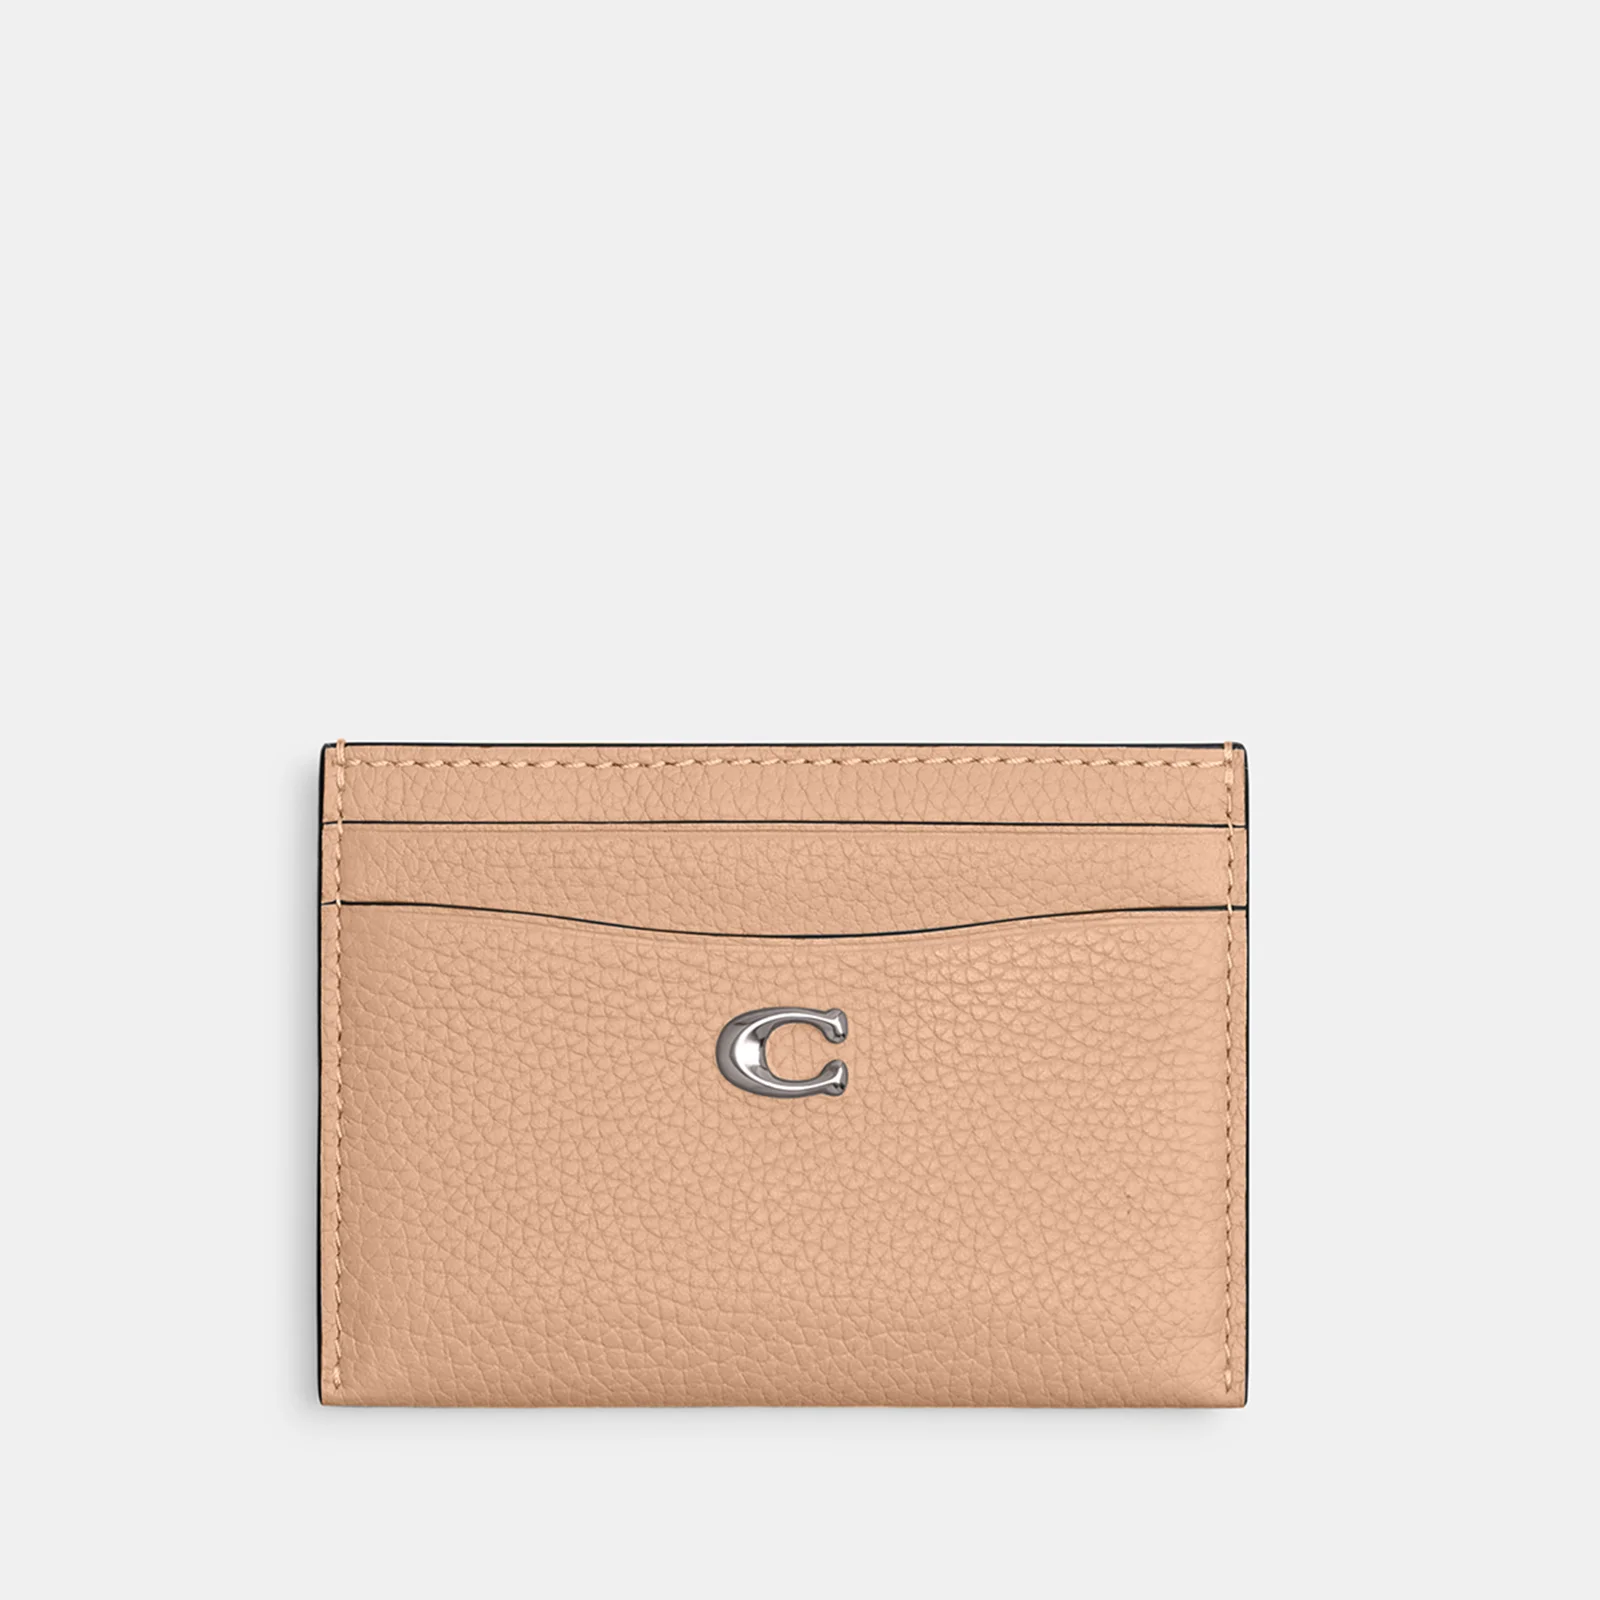 Coach Polished Pebble Essential Leather Card Case Image 1